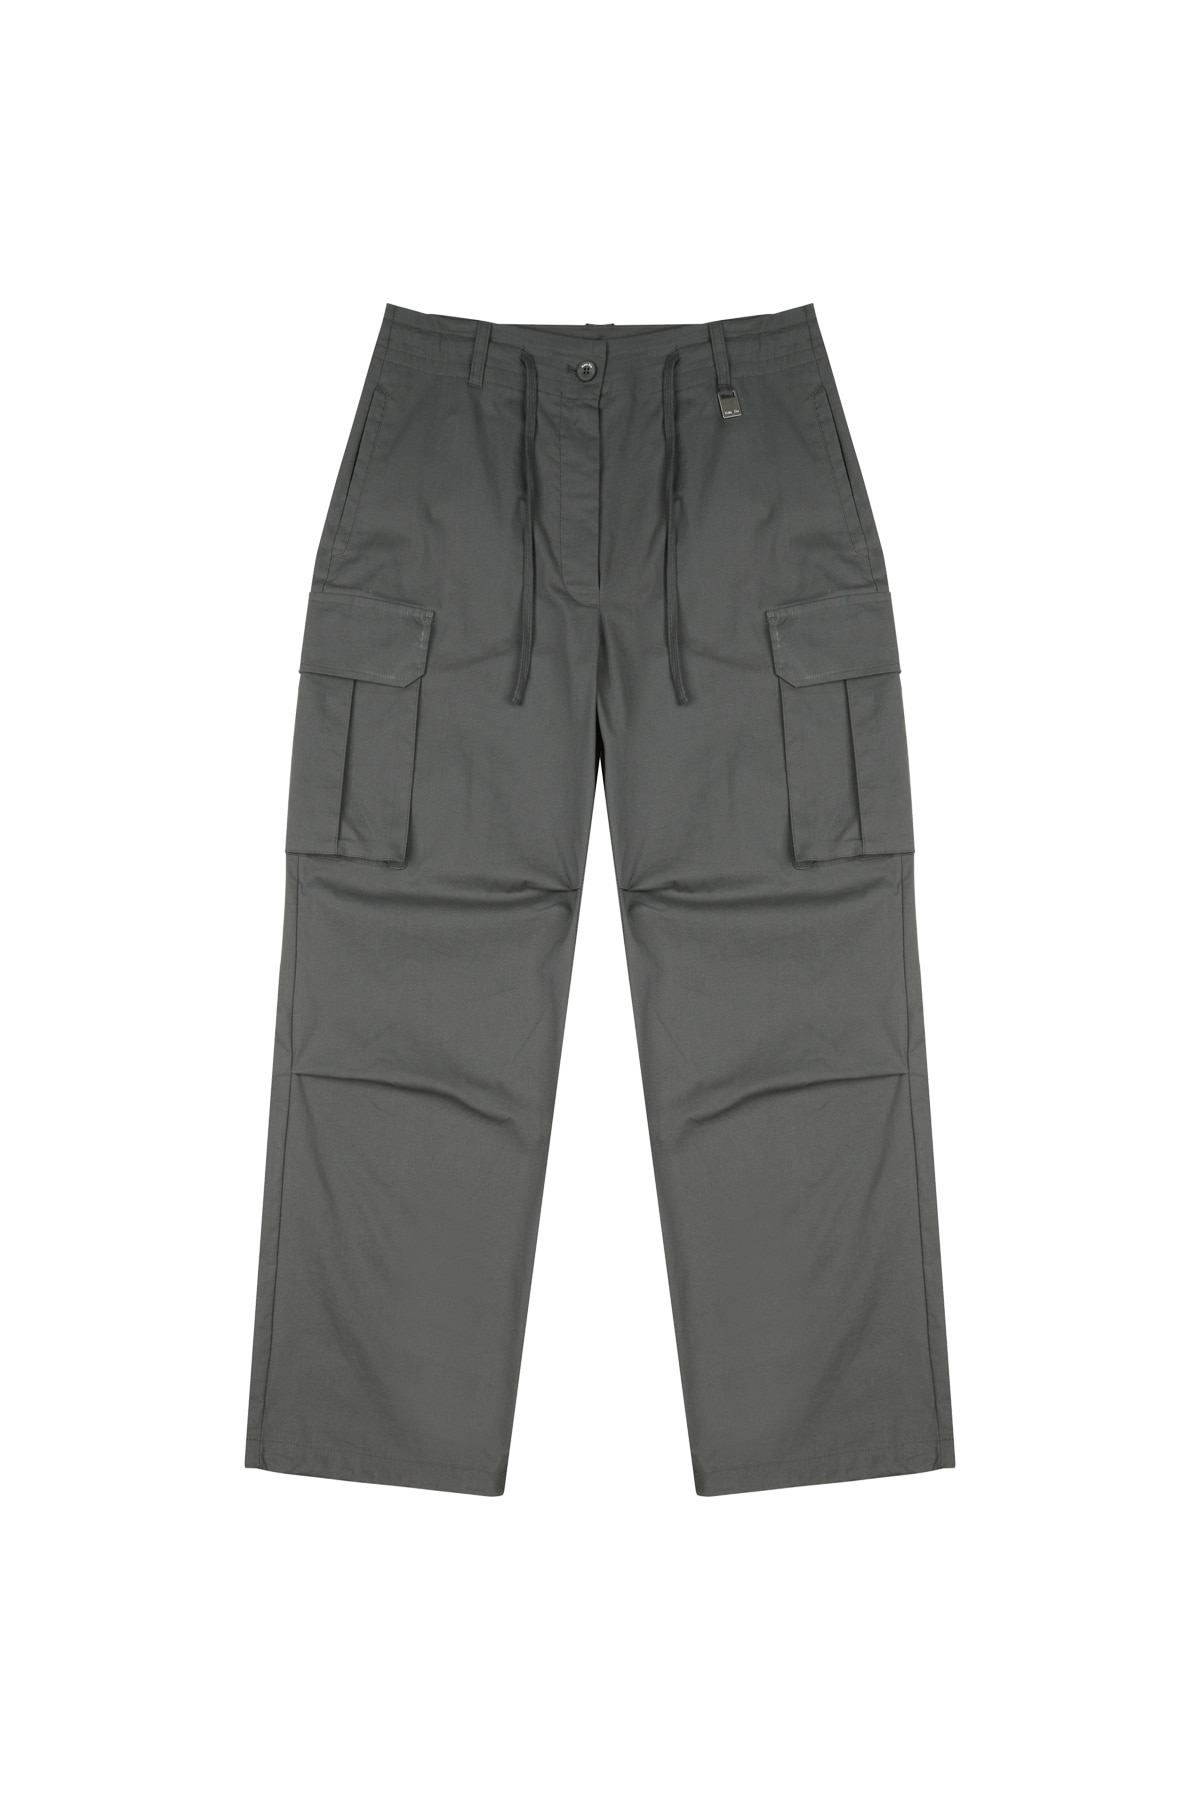 CARGO COTTON PANTS IN CHARCOAL